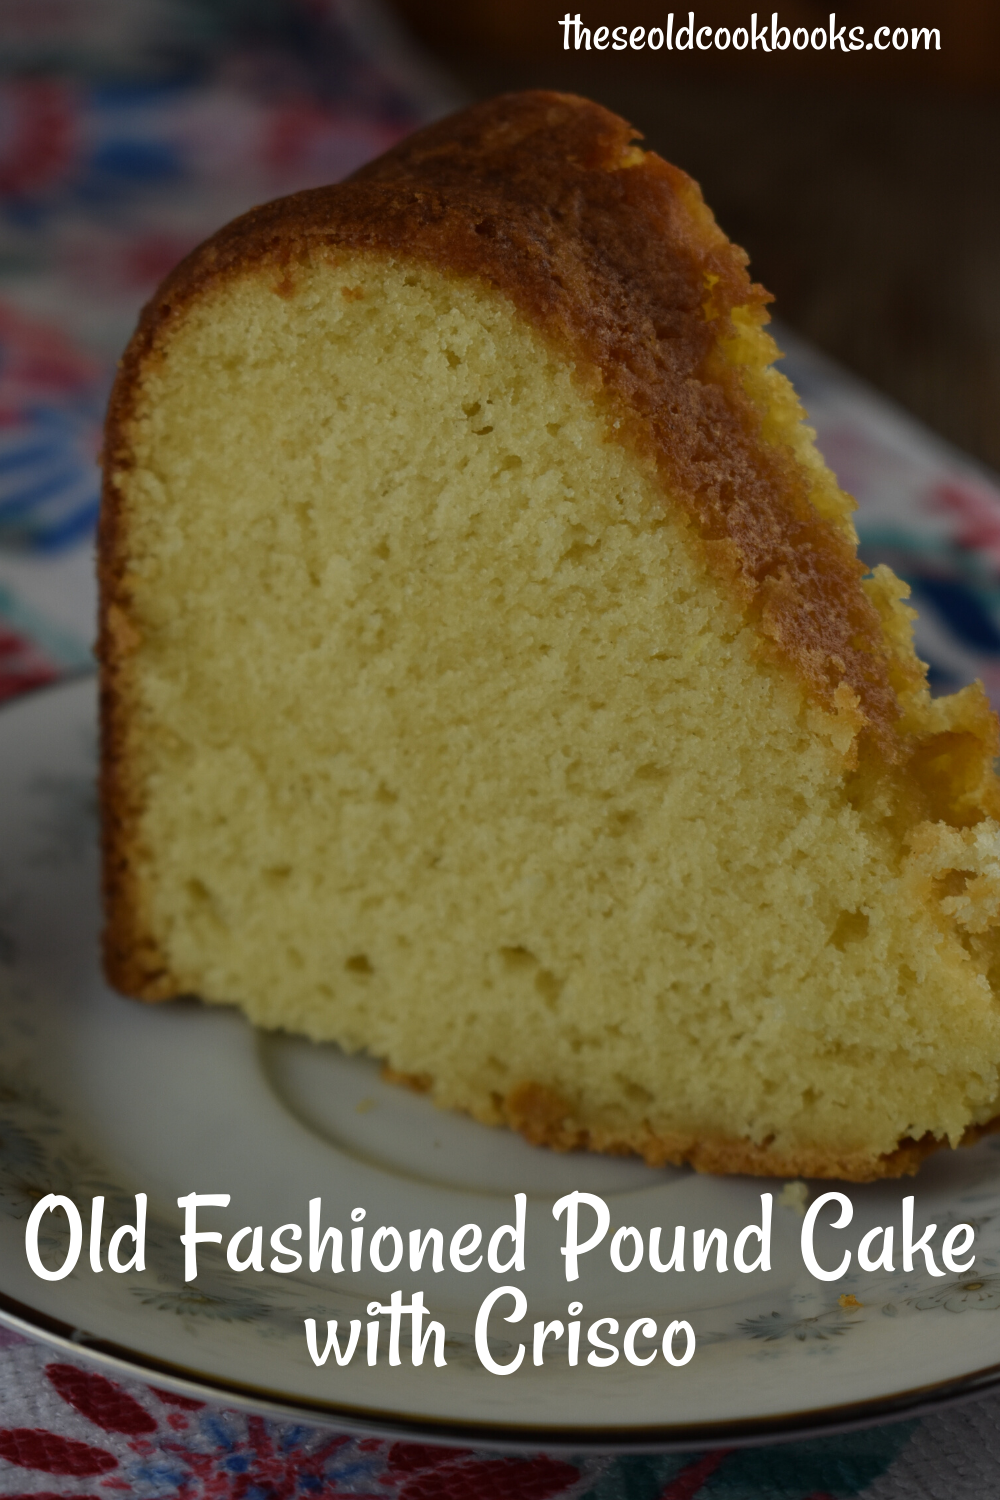 Grandma's Traditional Pound Cake is a special version uses butter, margarine and Crisco for a perfectly moist and dense texture.  Amateurs and professional bakers alike will fall for this easy recipe. Serve it up for dessert or breakfast, it will be a favorite for all.